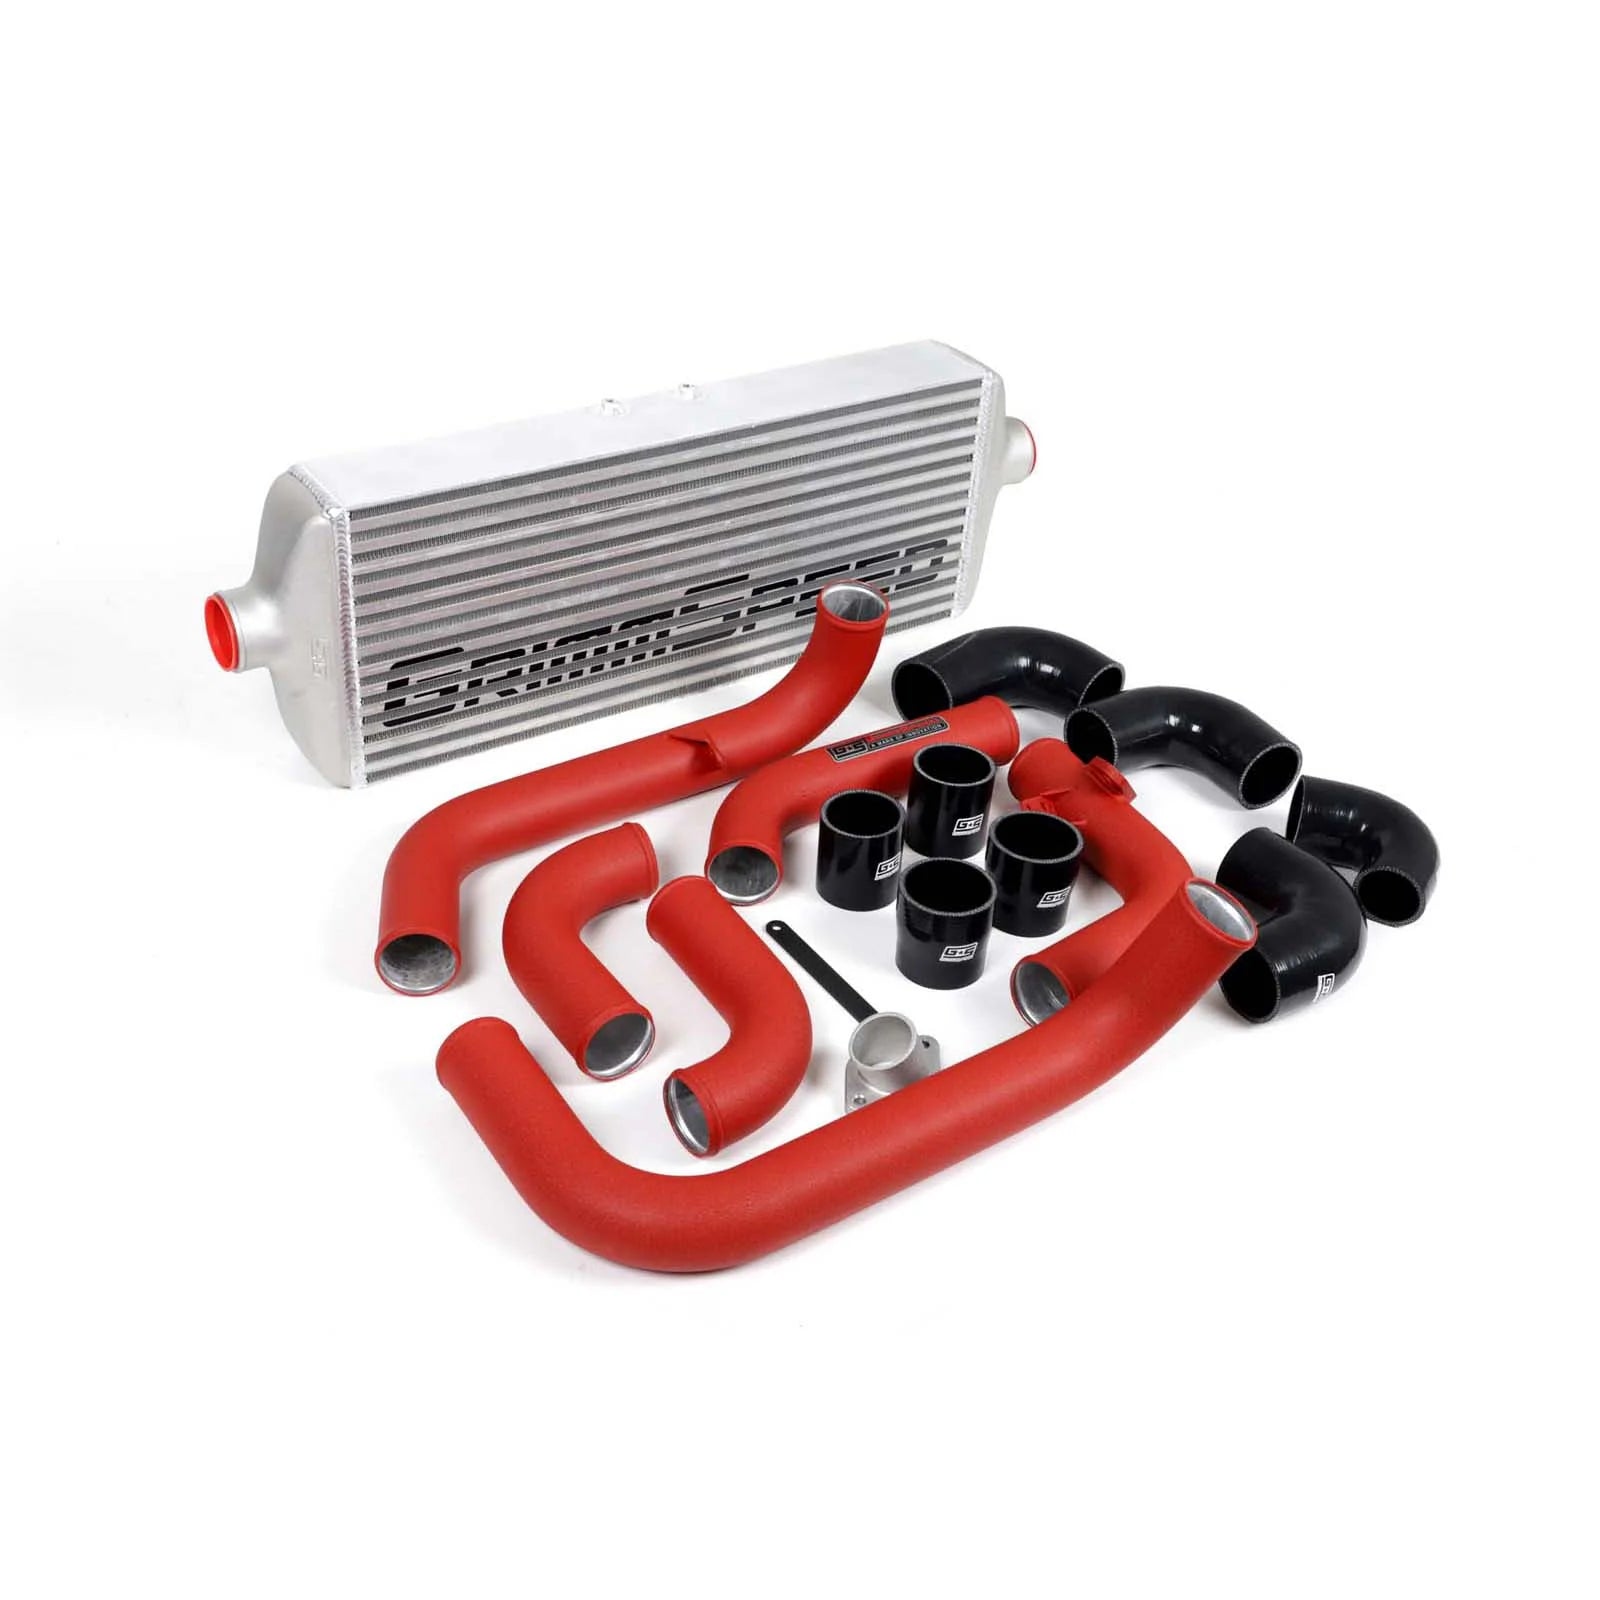 GrimmSpeed Front Mount Intercooler Kit - Raw Core with Red Piping - 2008-14 Subaru WRX